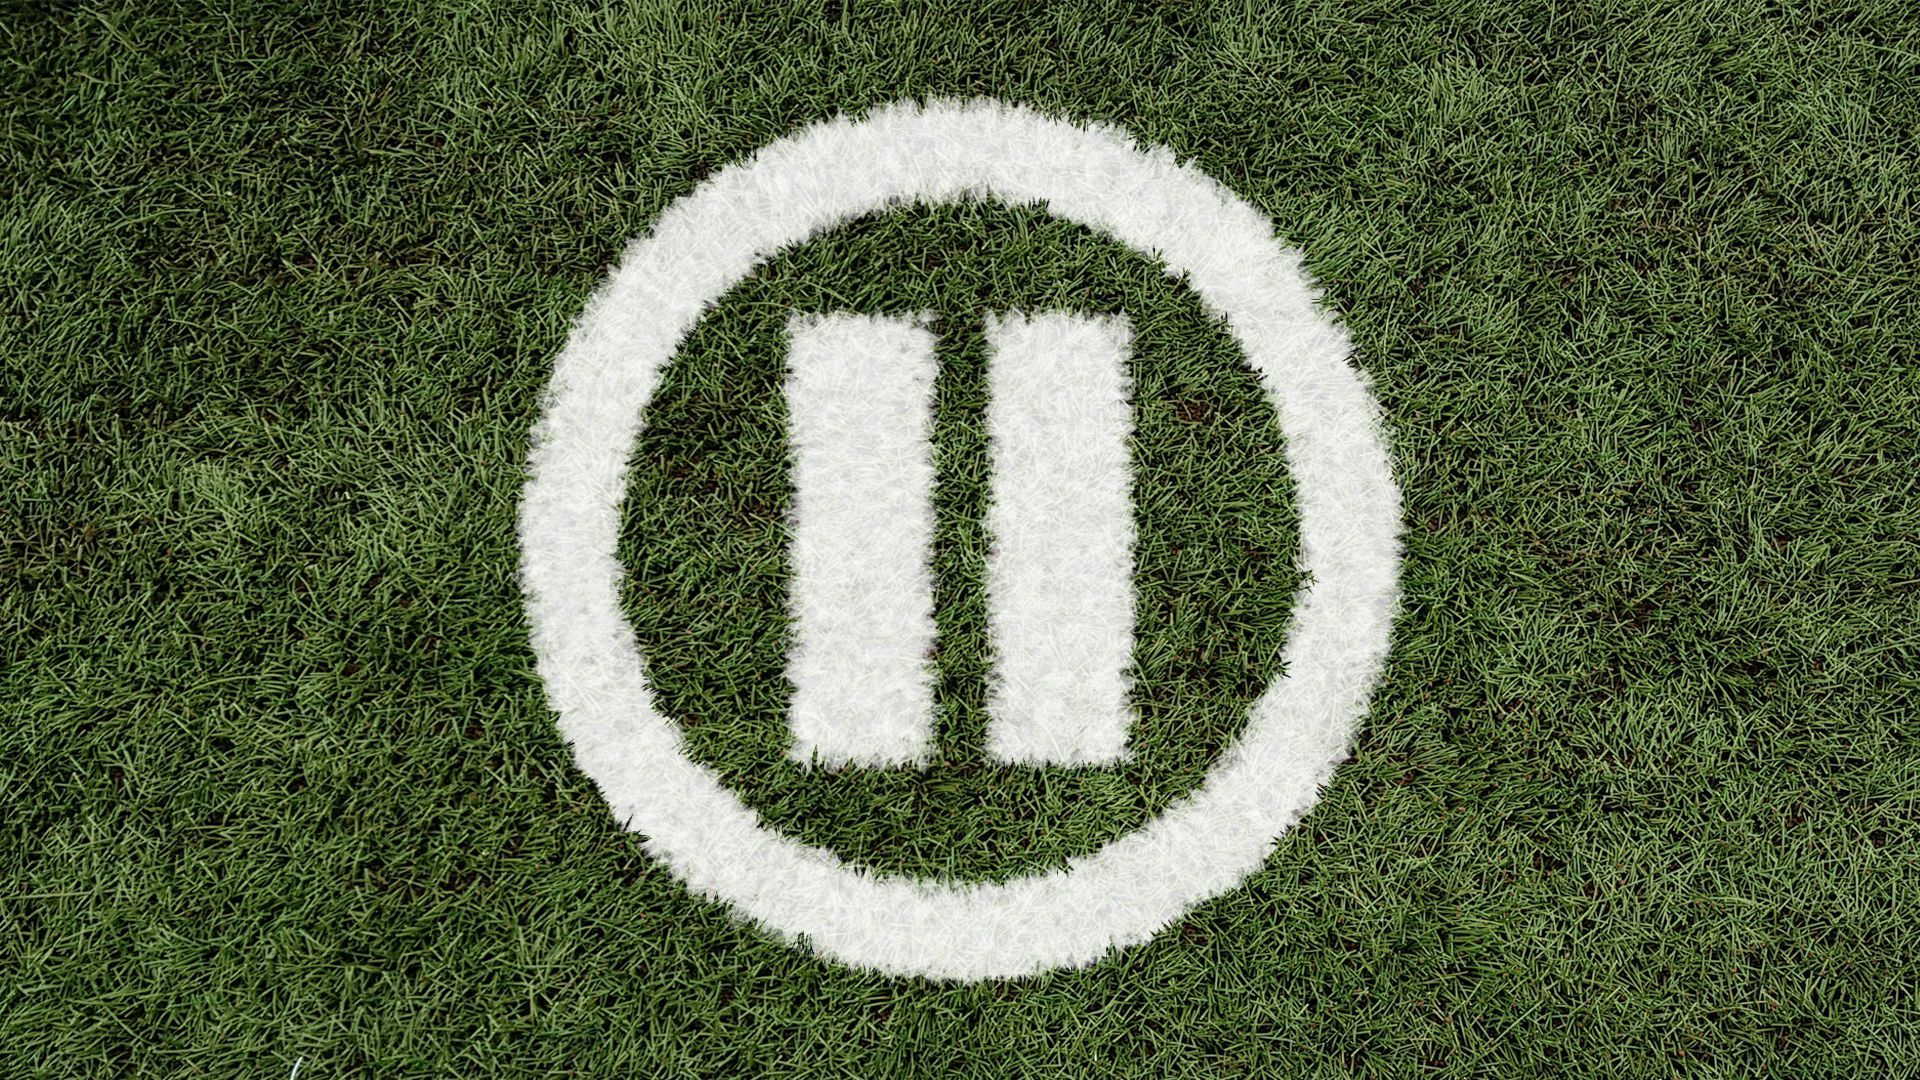 Illustration of a pause-button symbol painted on a grass field